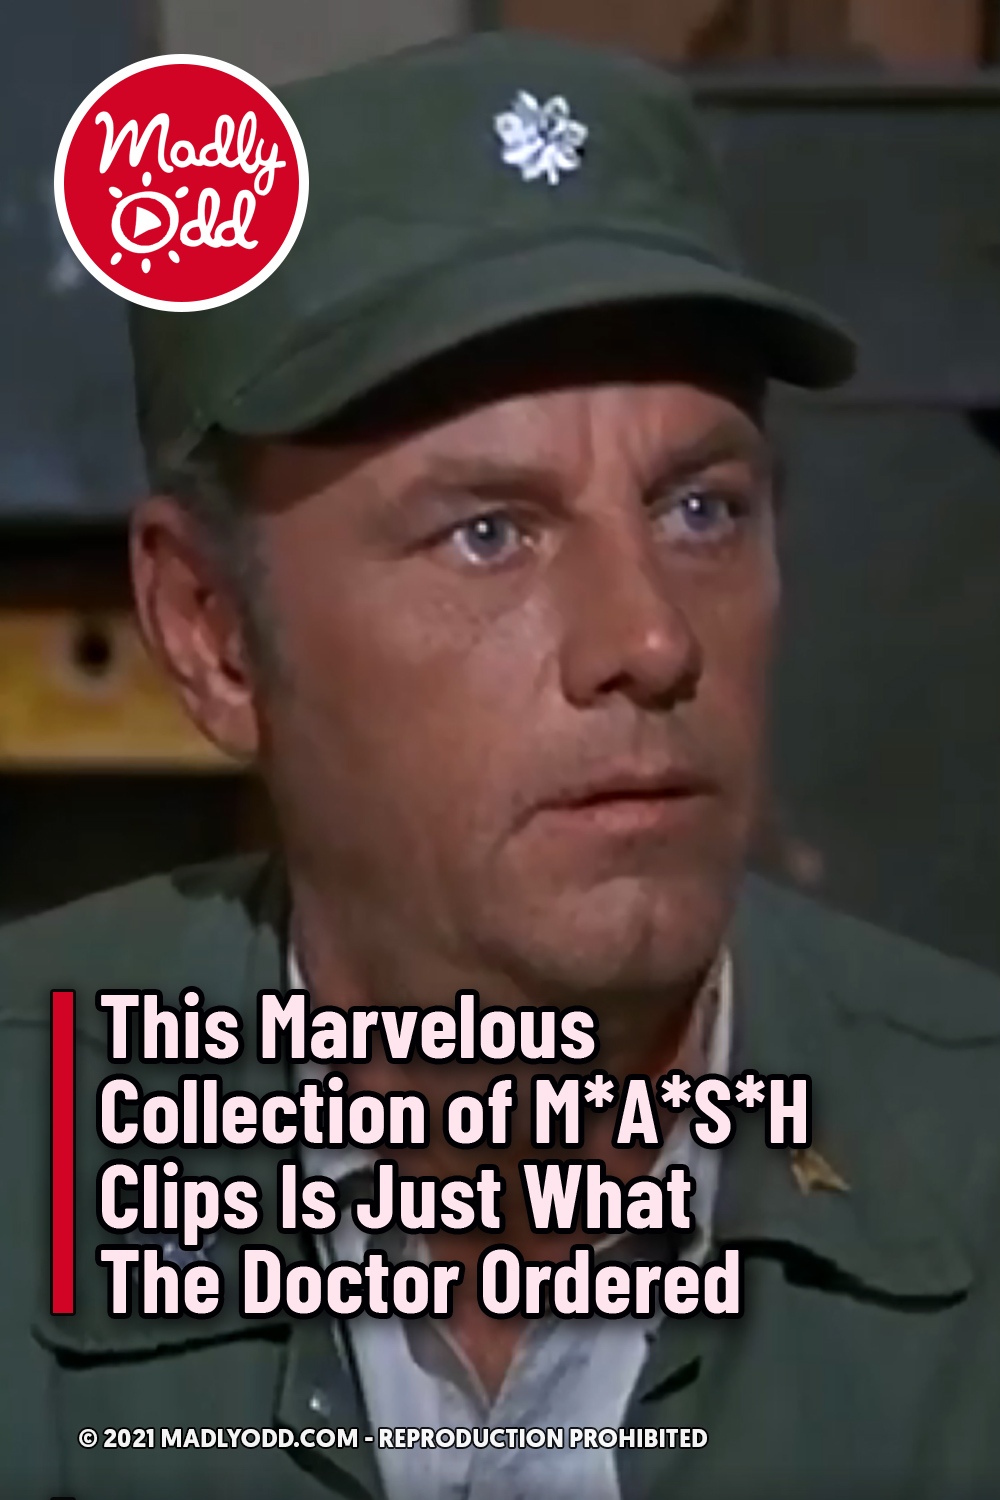 This Marvelous Collection of M*A*S*H Clips Is Just What The Doctor Ordered